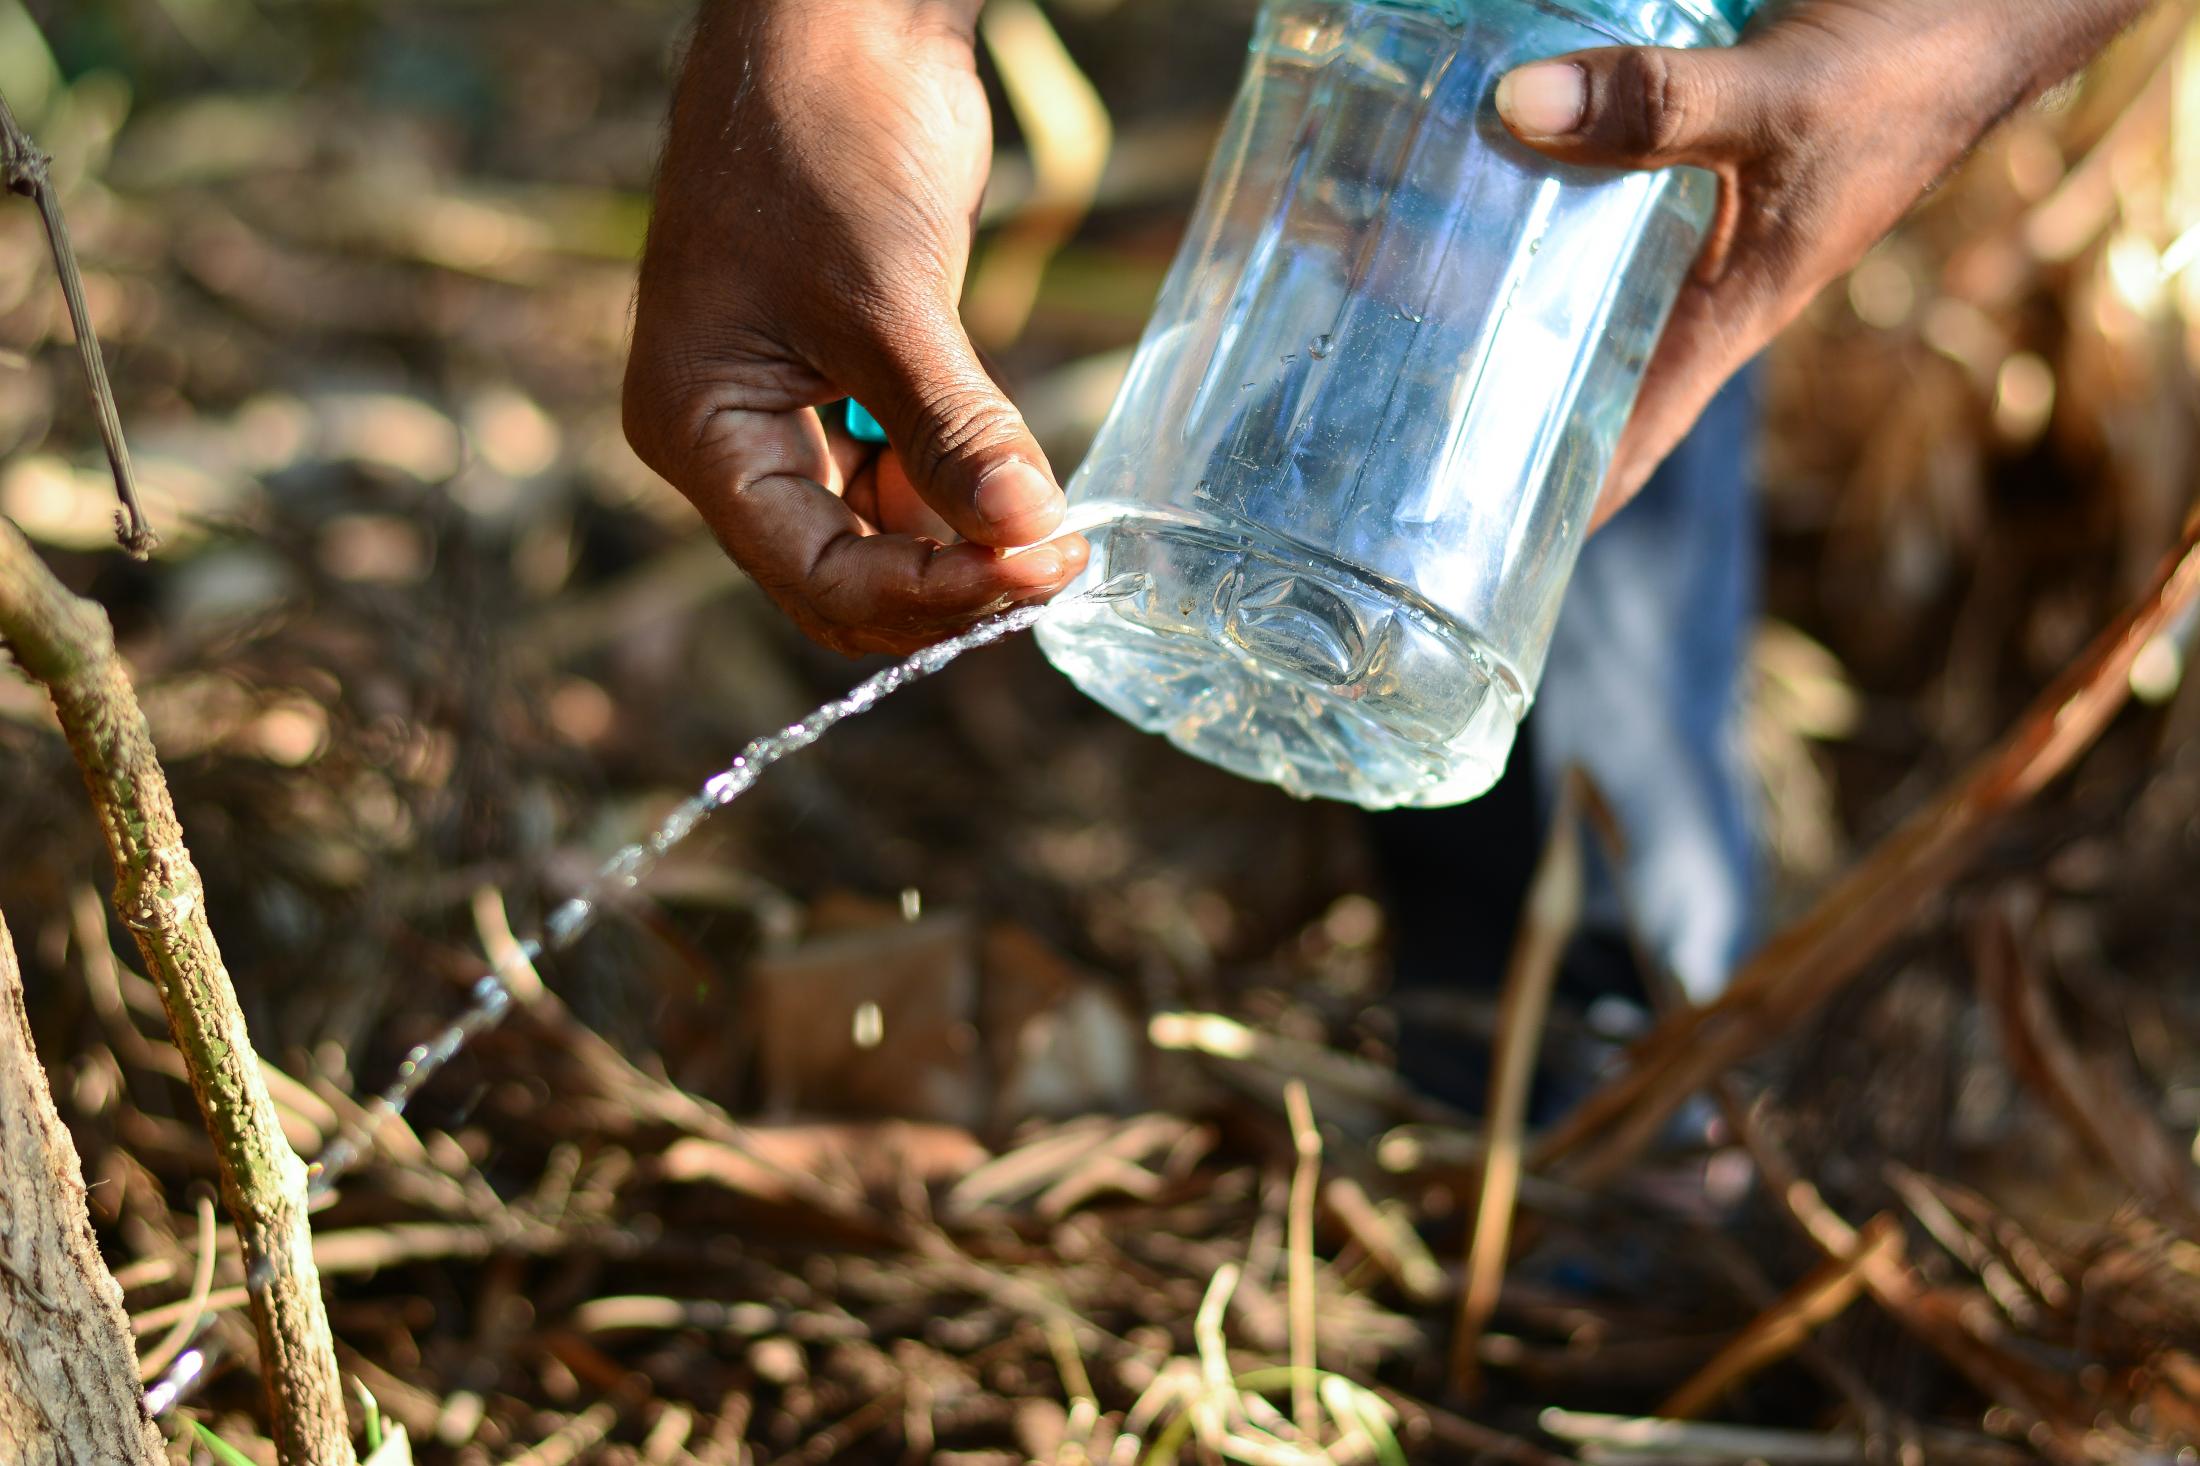 Swamy uses a basic drip irrigation method to water some of his crops. Once he make a tiny opening in the bottle, he puts a stick in it and leaves it by the tree and the water slowly drips into the soil.